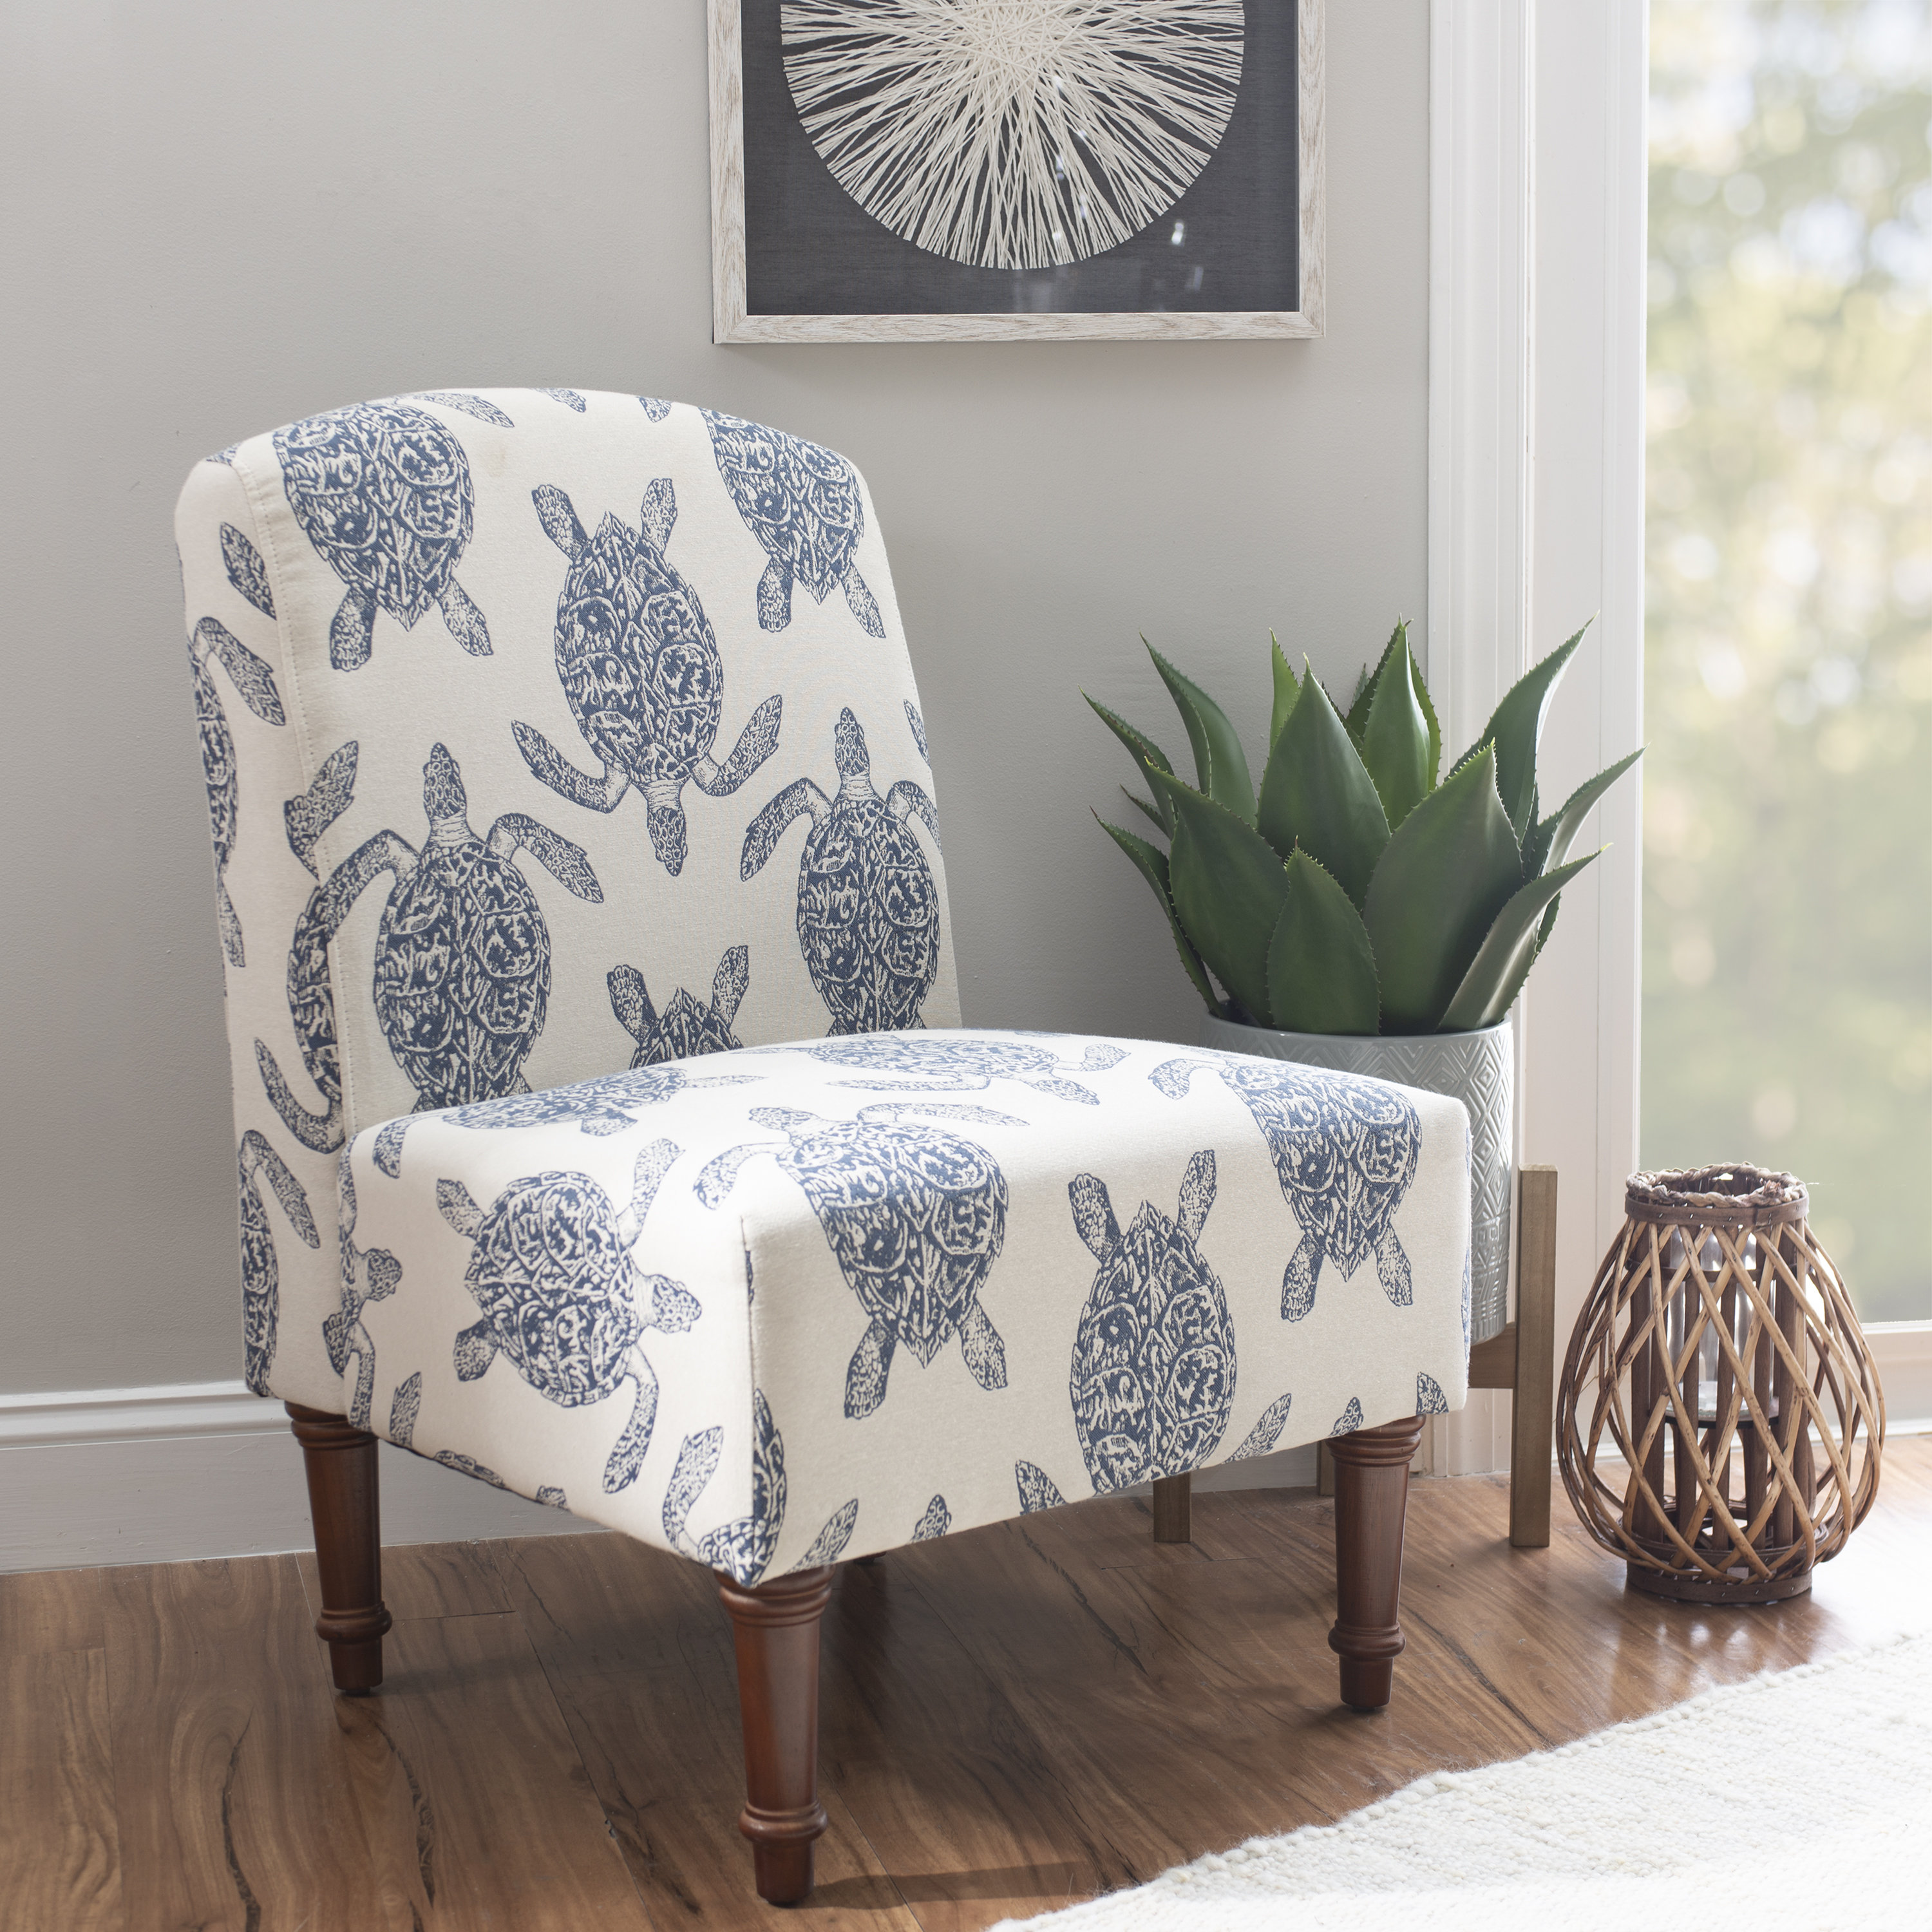 Upholstering a Chair Coastal Style, 26 Upholstered Chair Ideas & How To